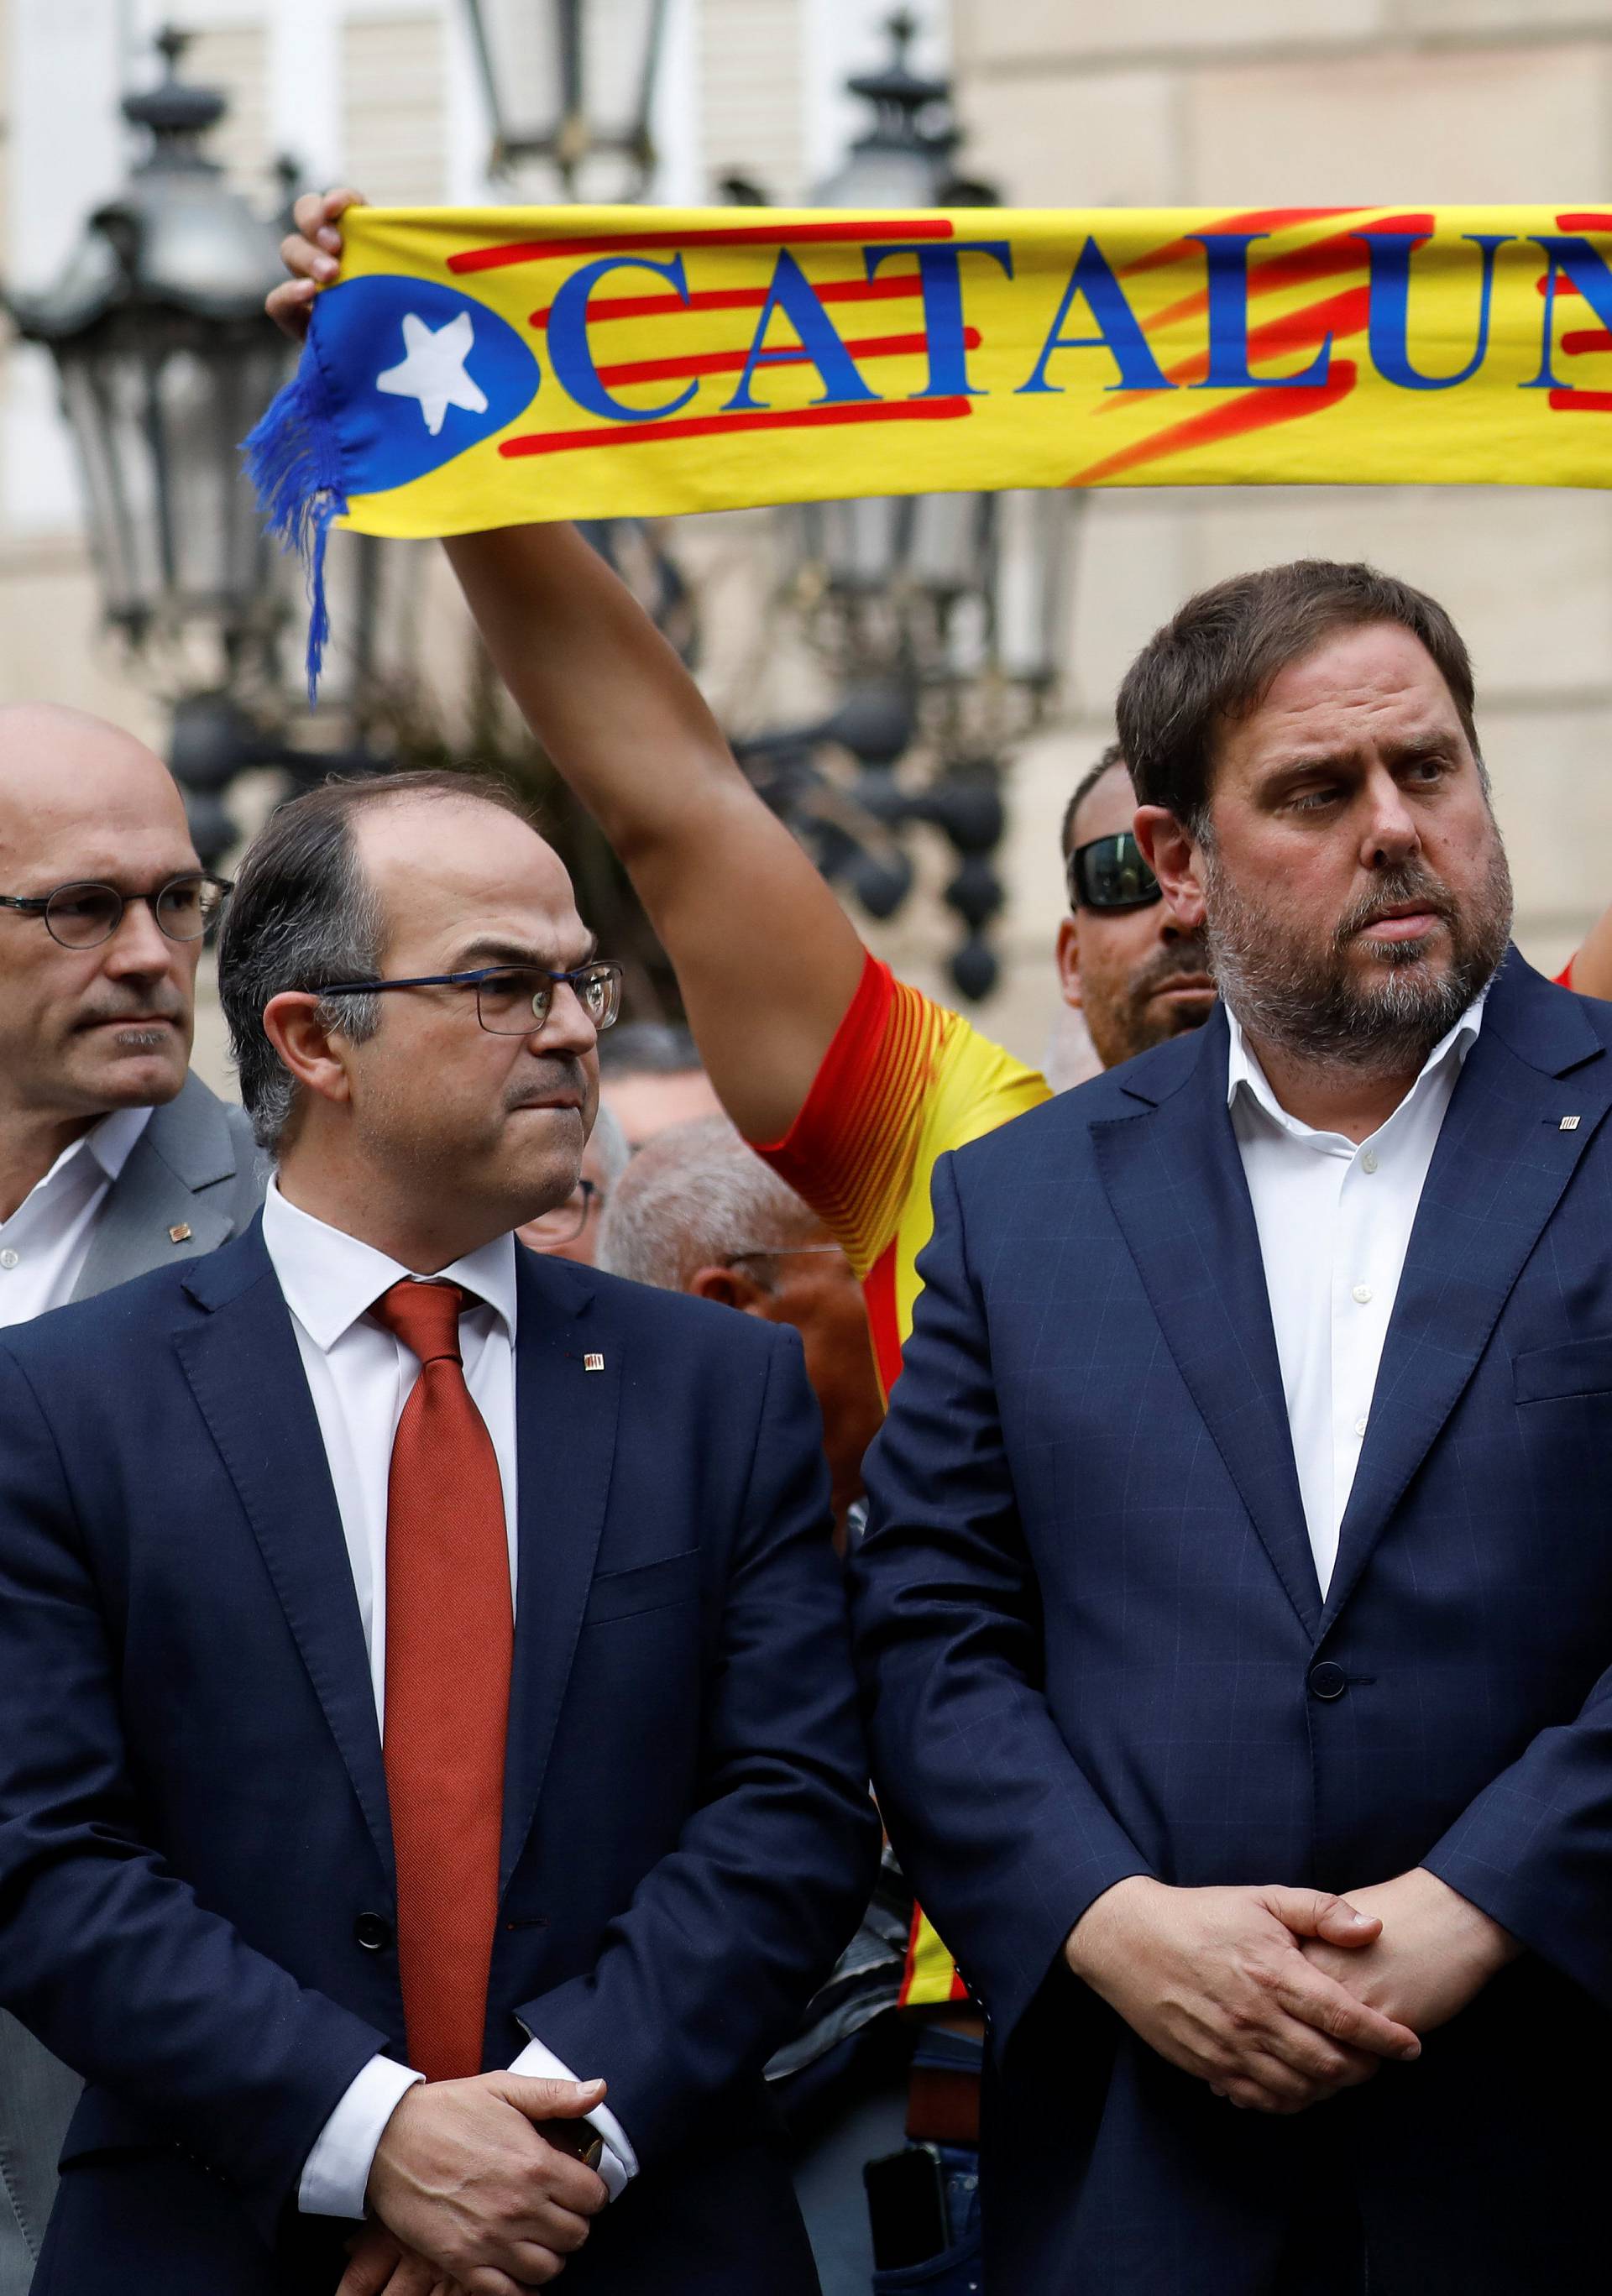 Catalan President Carles Puigdemont and other dignitaries stand in Plaza Sant Jaume in Barcelona